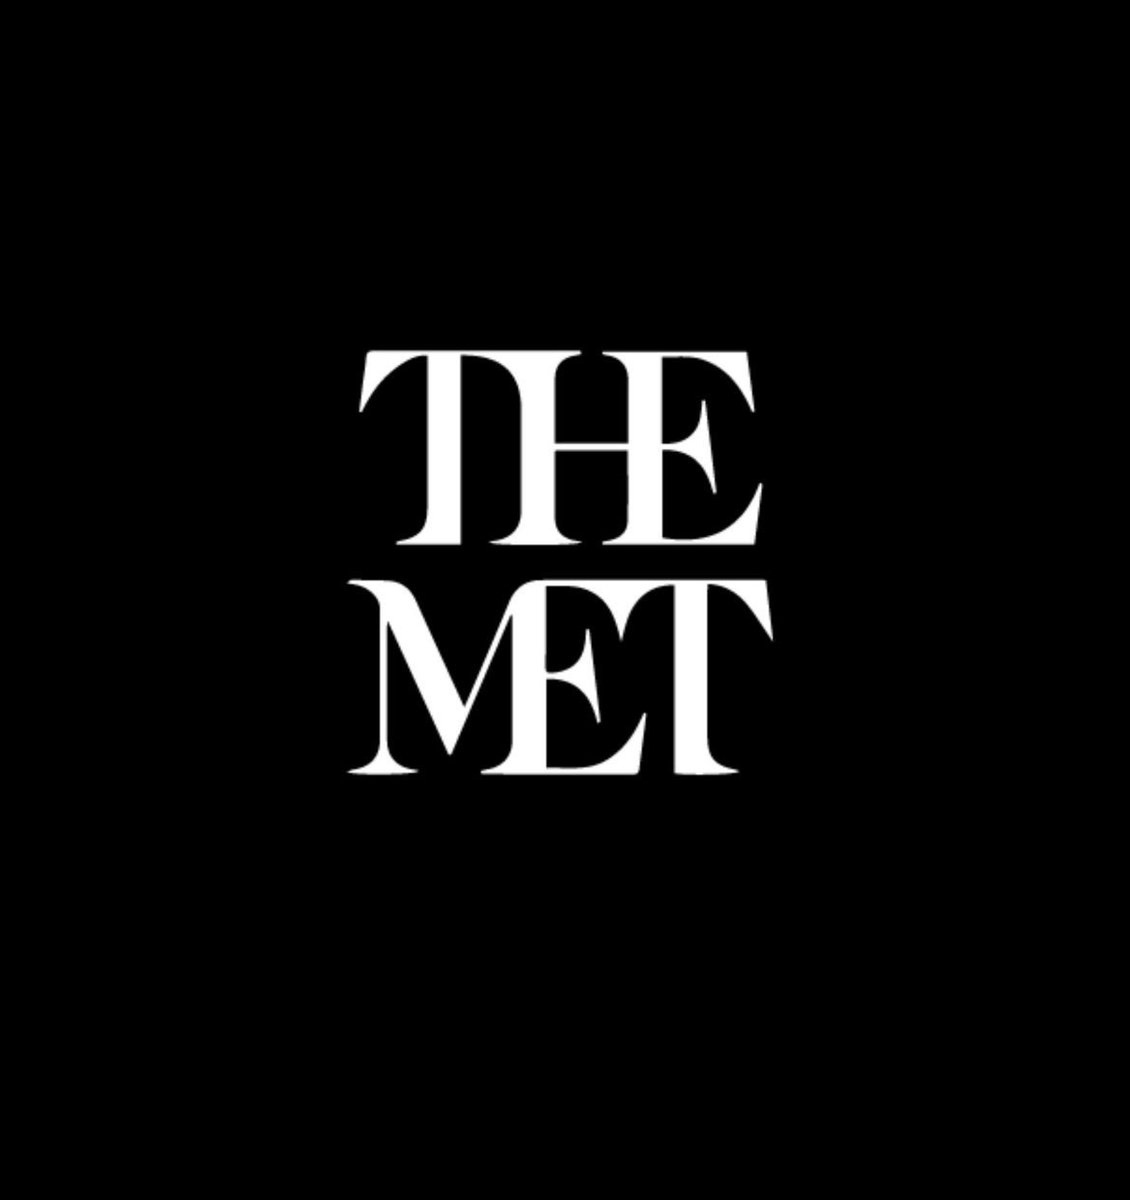 some of my favorite looks from the MET gala tonight - a thread 🧵